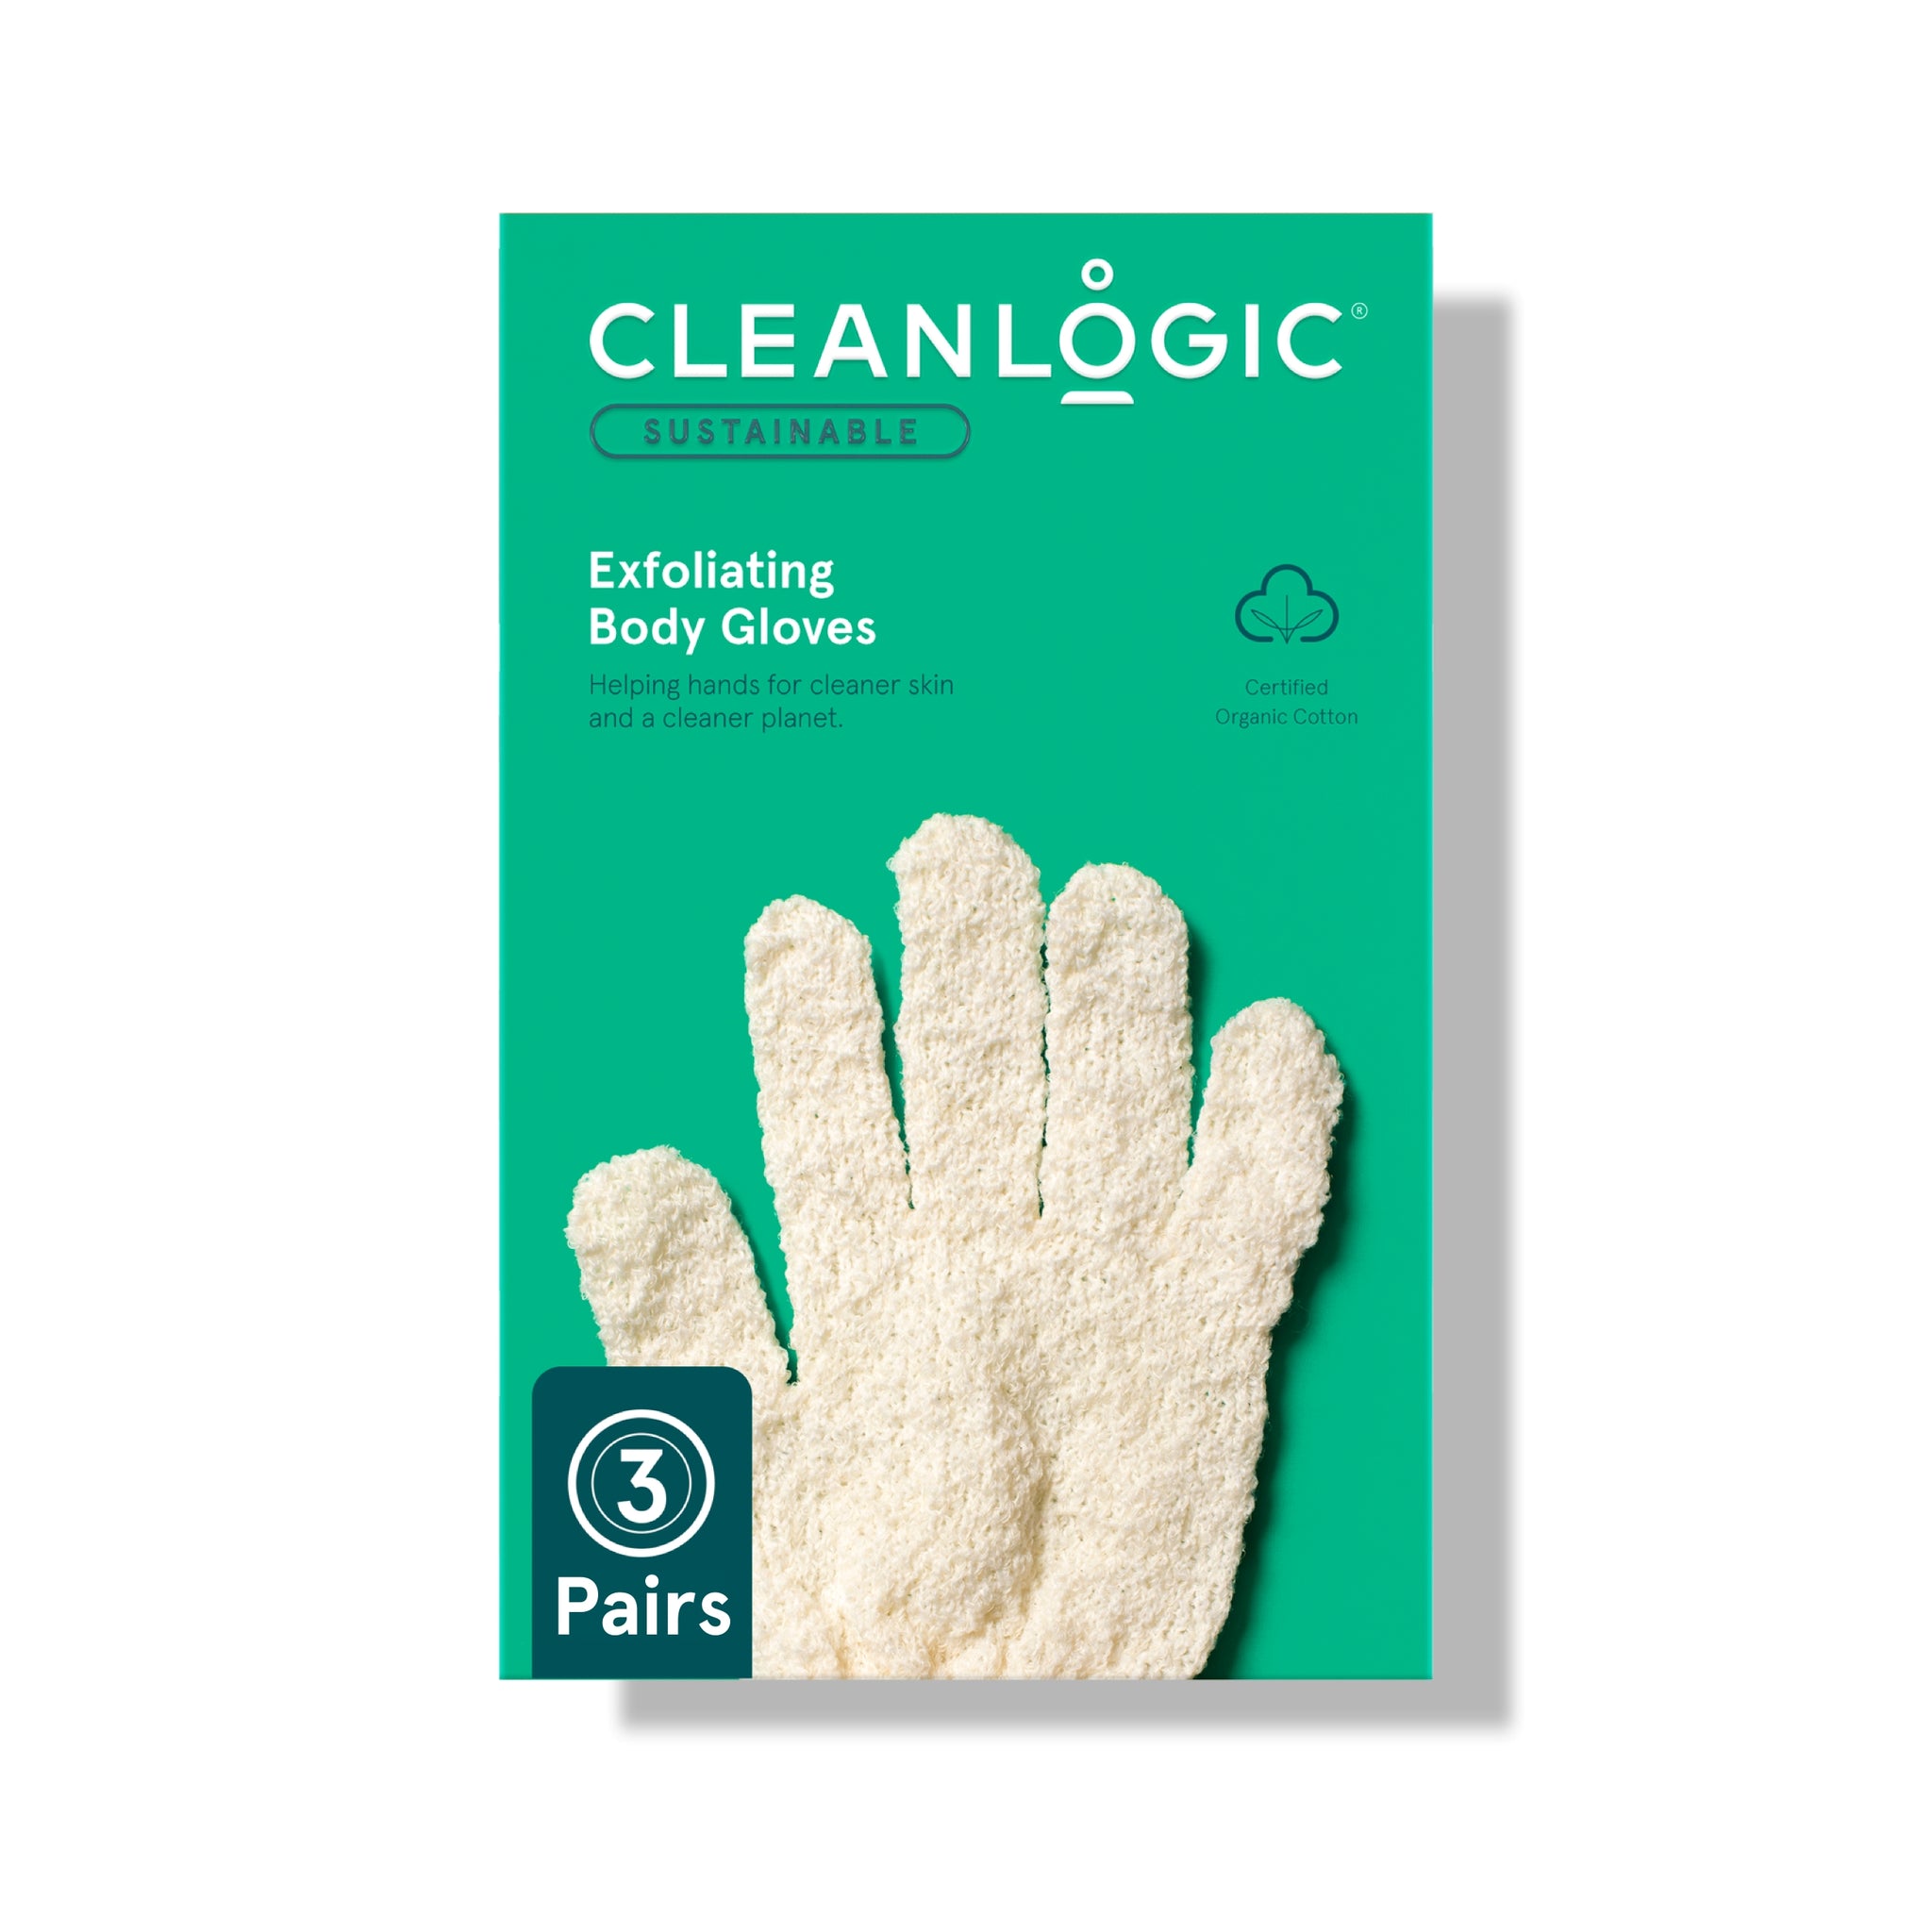 Sustainable Exfoliating Body Gloves, 3 Pair – 6 Count – Cleanlogic Body Care